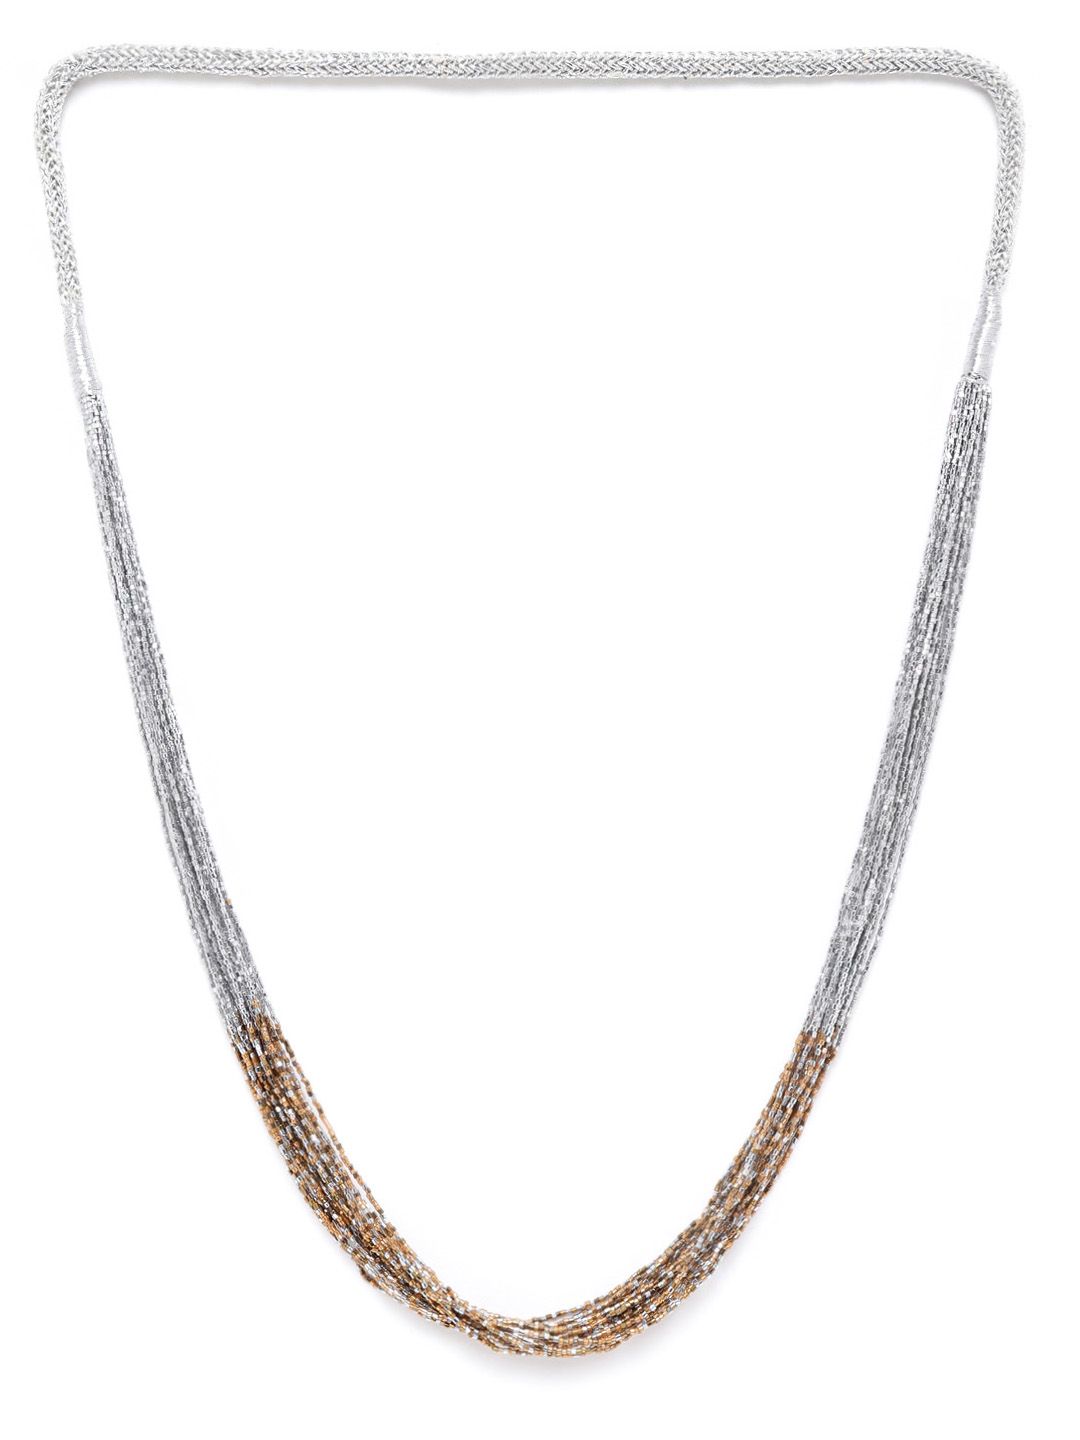 RICHEERA Silver-Toned & Gold-Toned Beaded Multi-Stranded Necklace Price in India